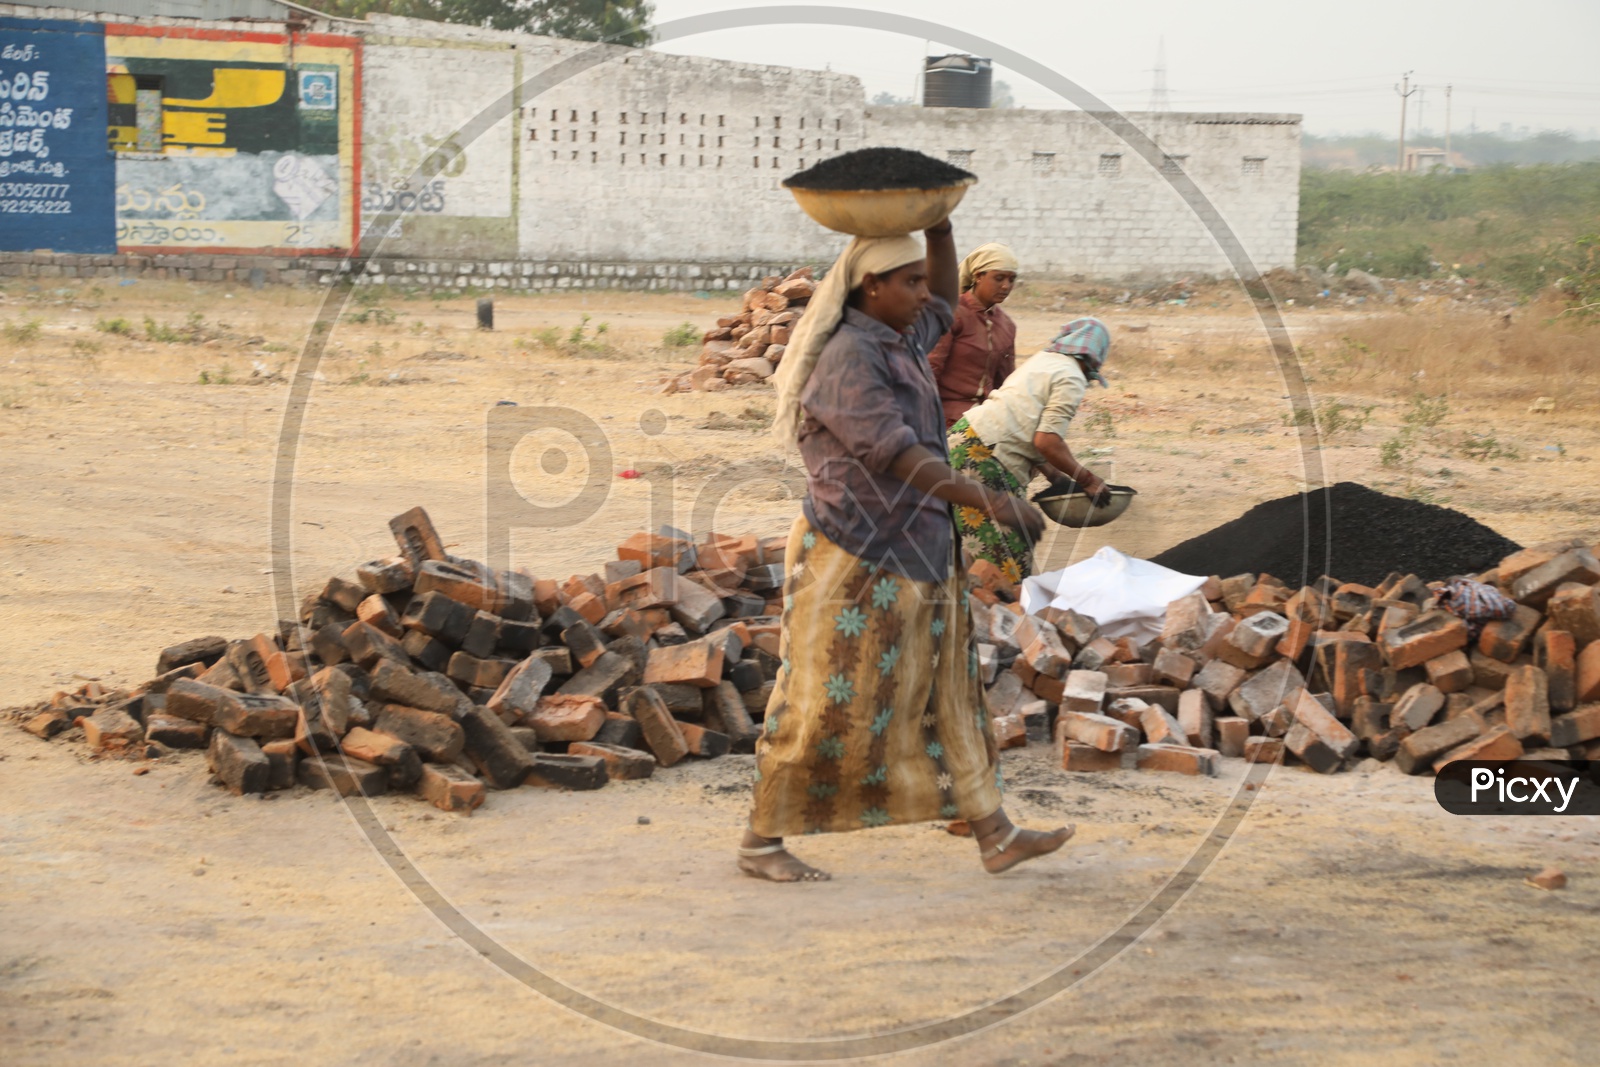 Women working at a local brick factory